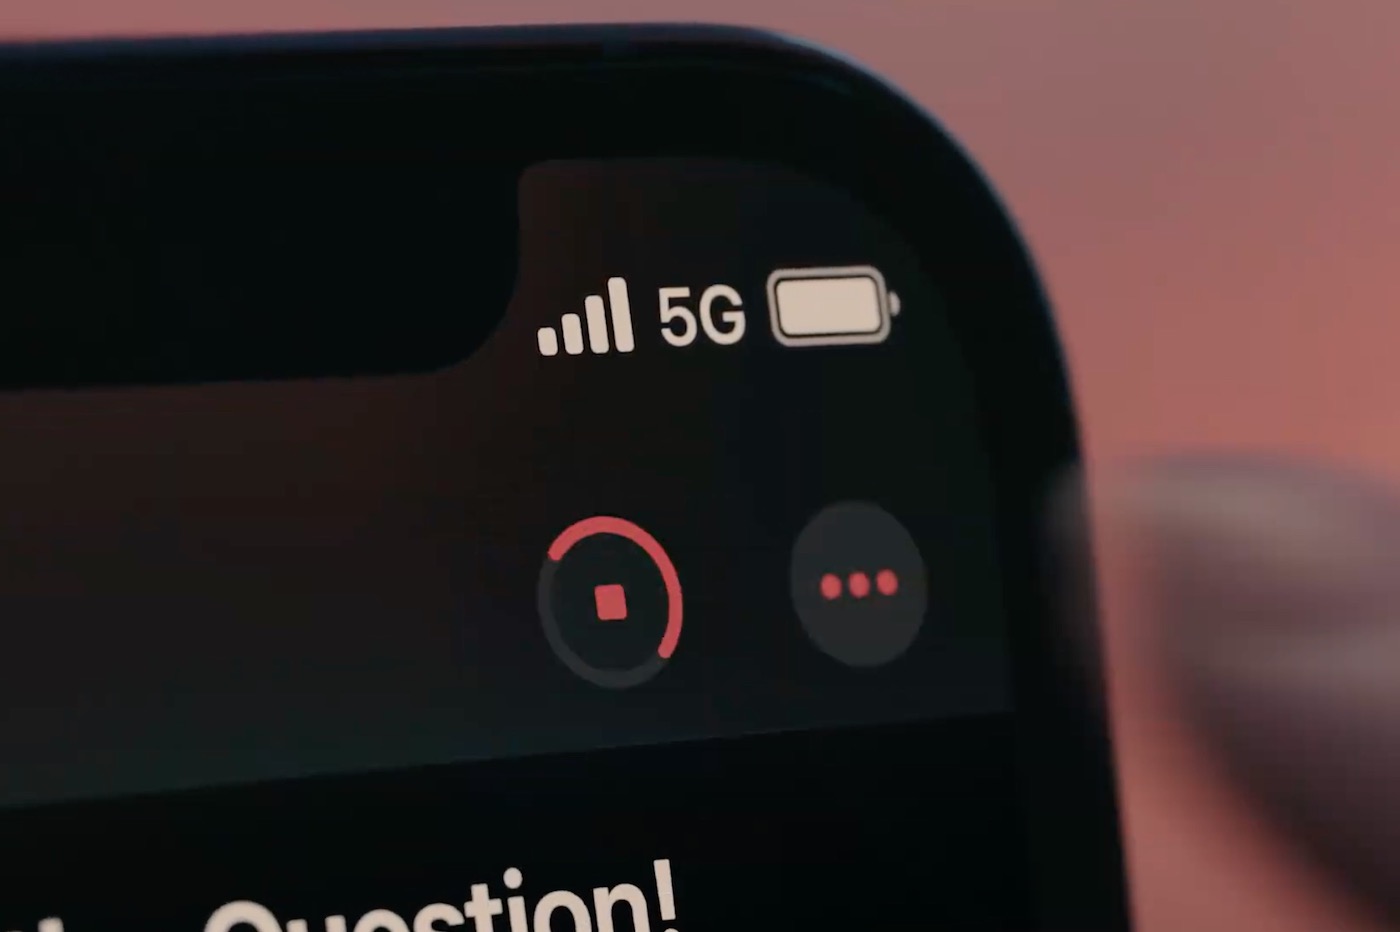 bugs in the 5G protocol